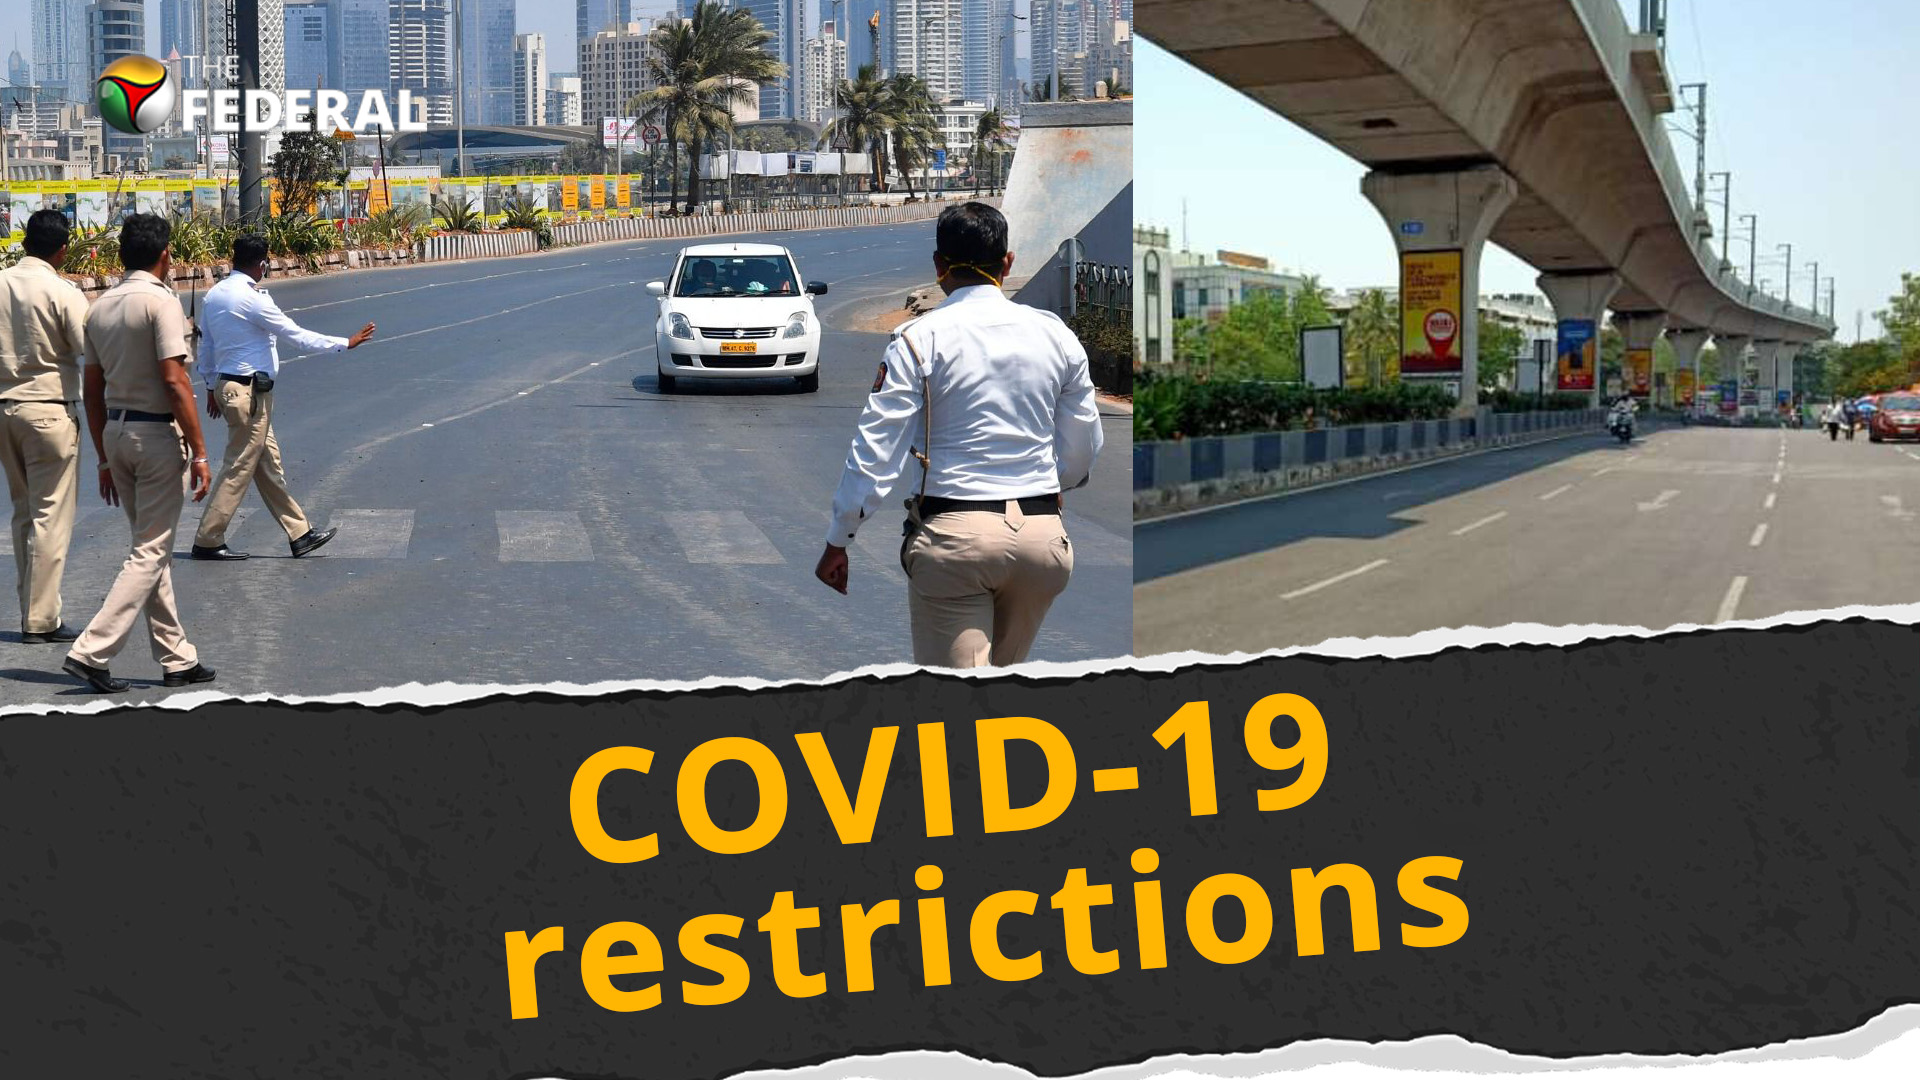 Check COVID-19 restrictions imposed in various states